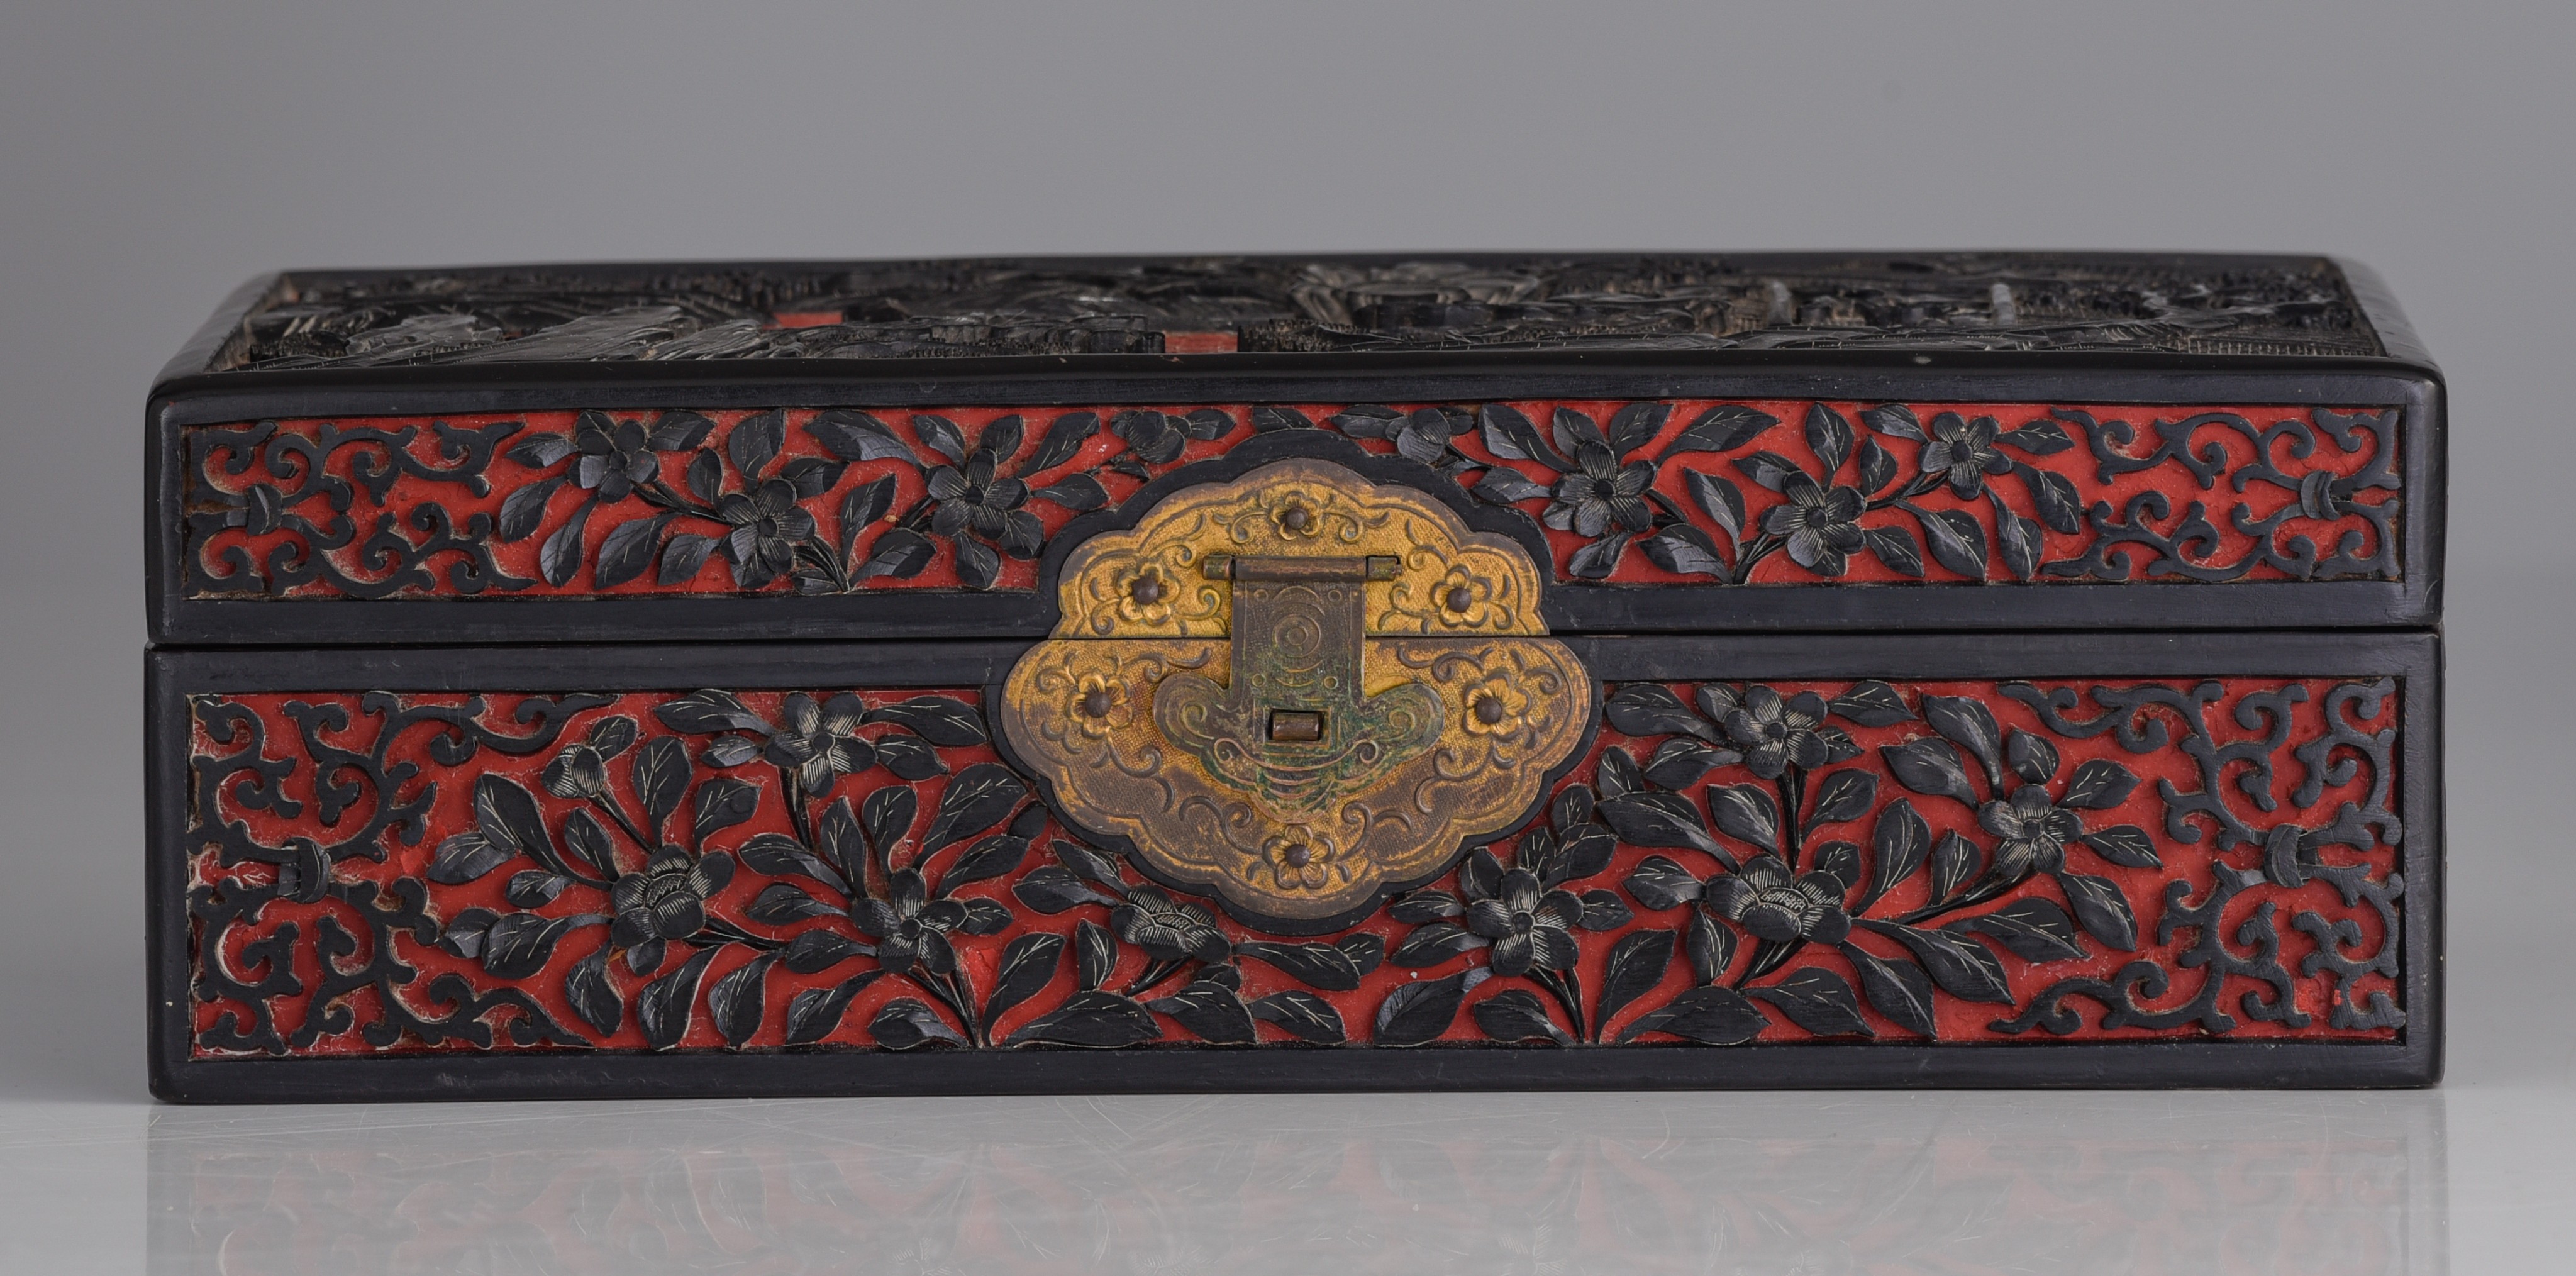 A Chinese carved lacquered jewellery box, late Qing/Republic period, H 9 - 28 x 20 cm - Image 2 of 9